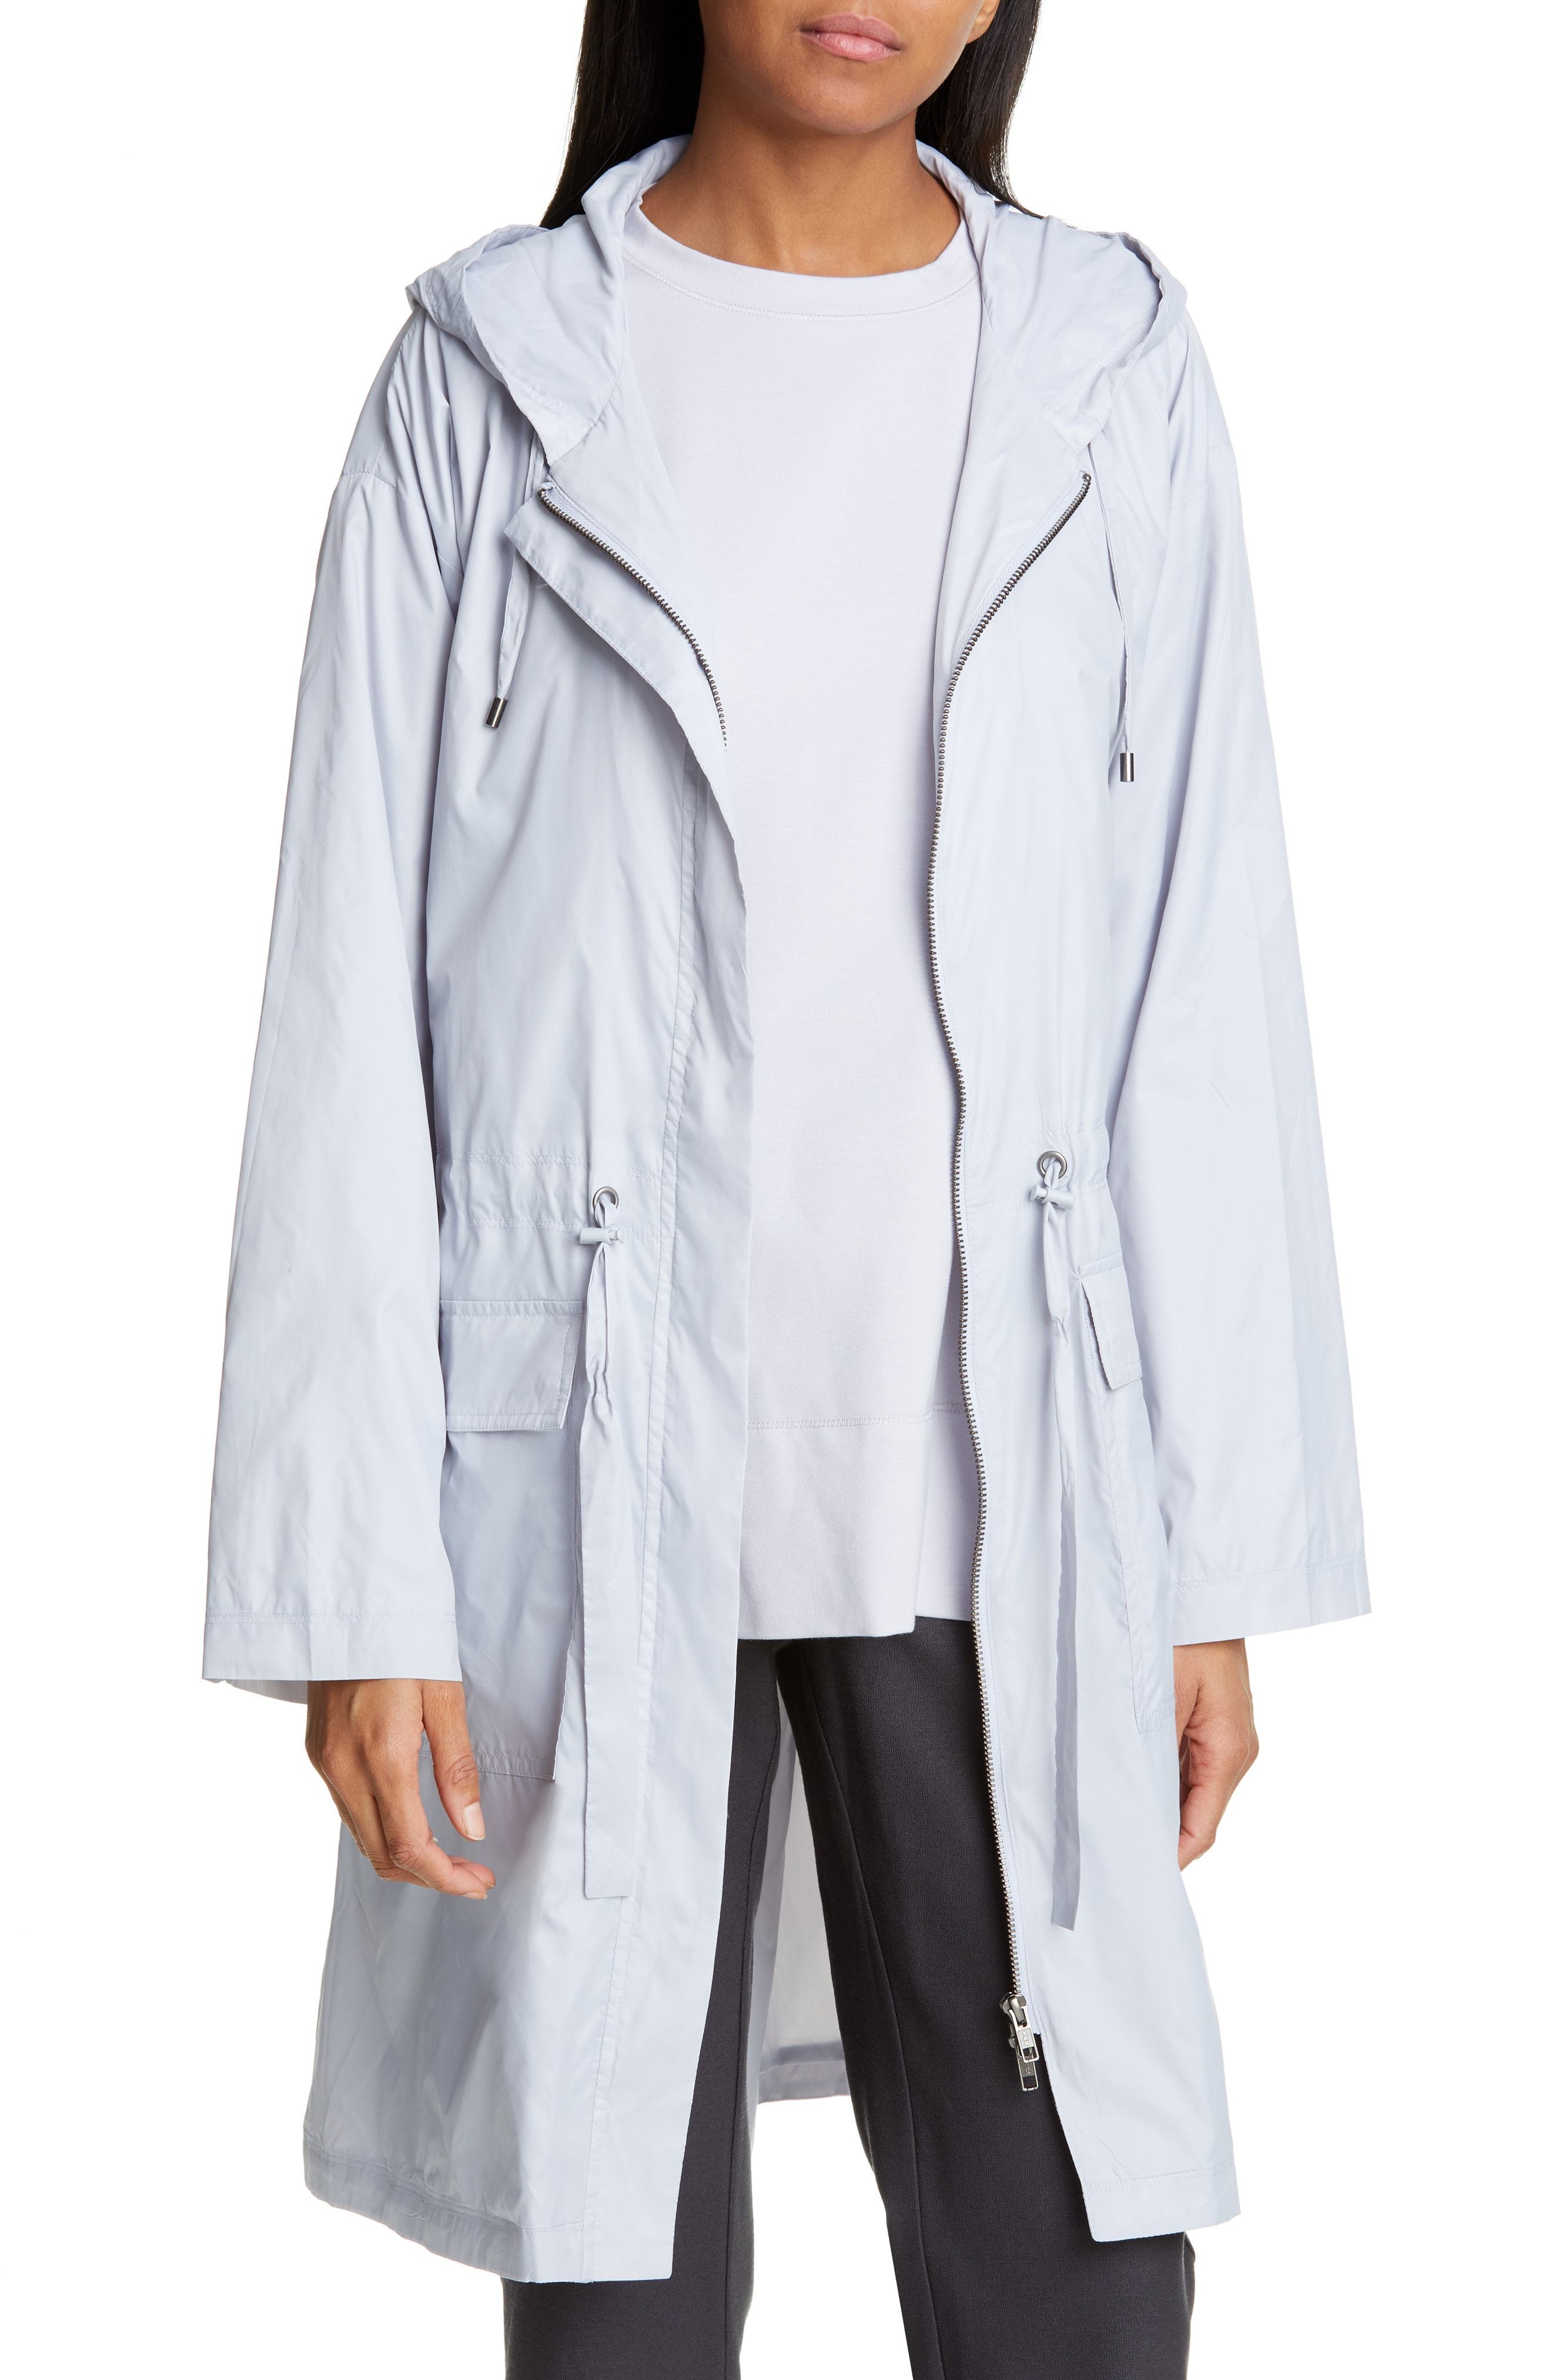 Eileen Fisher Hooded Recycled Nylon Jacket, $118, Nordstrom